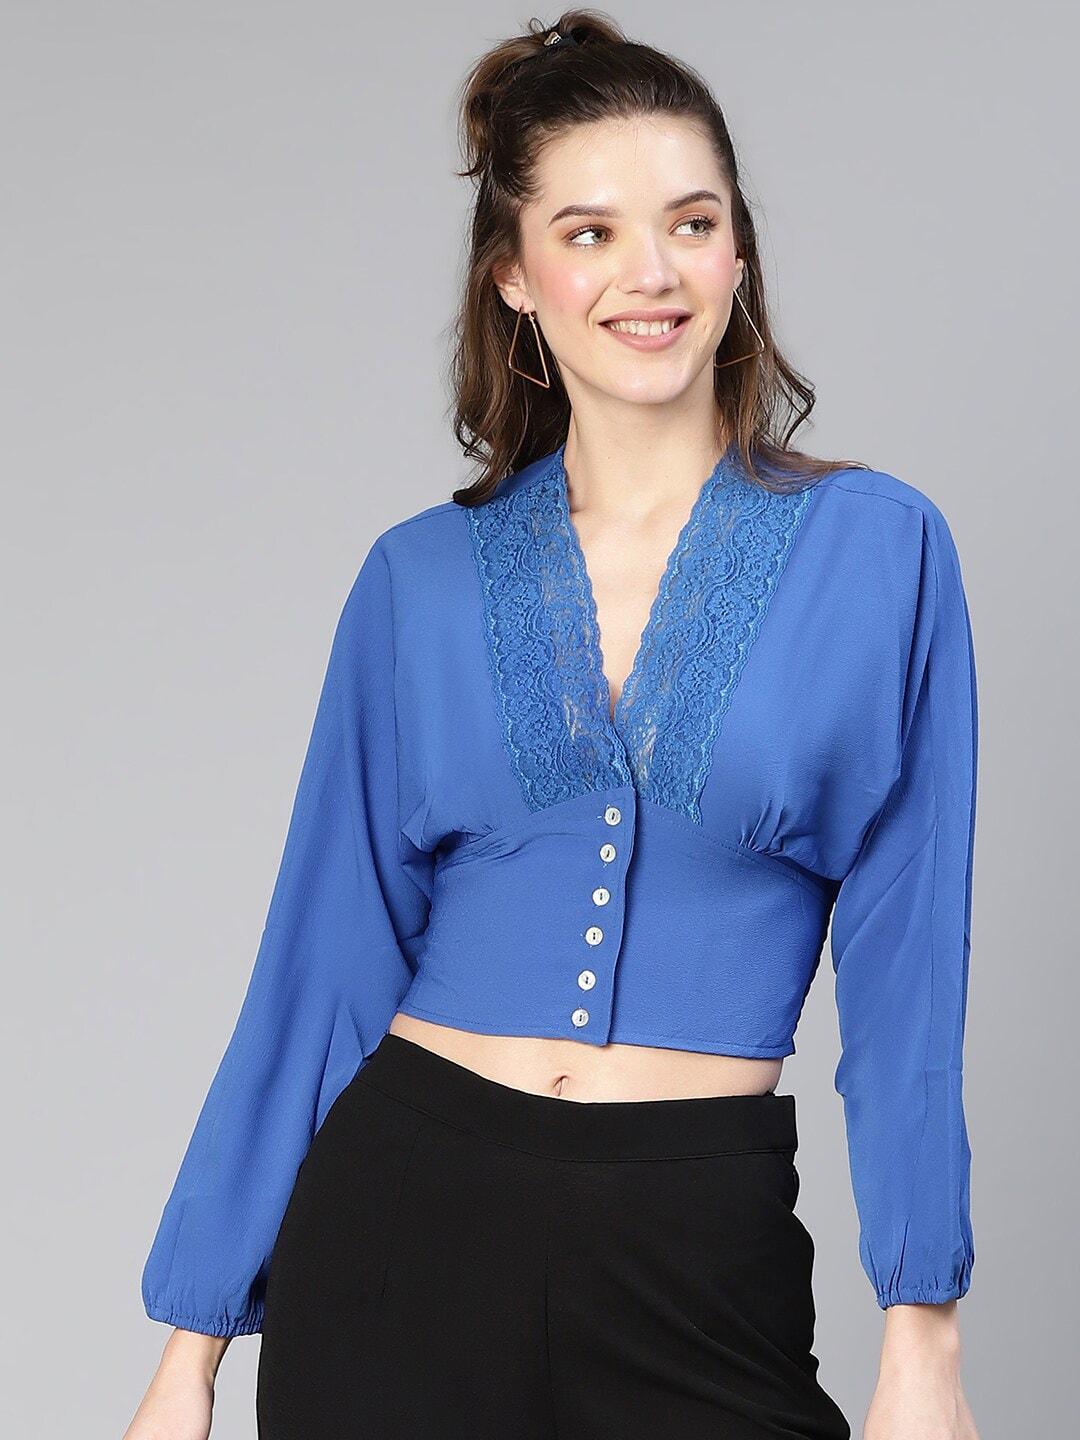 oxolloxo v-neck three-quarter puff sleeves crepe crop top